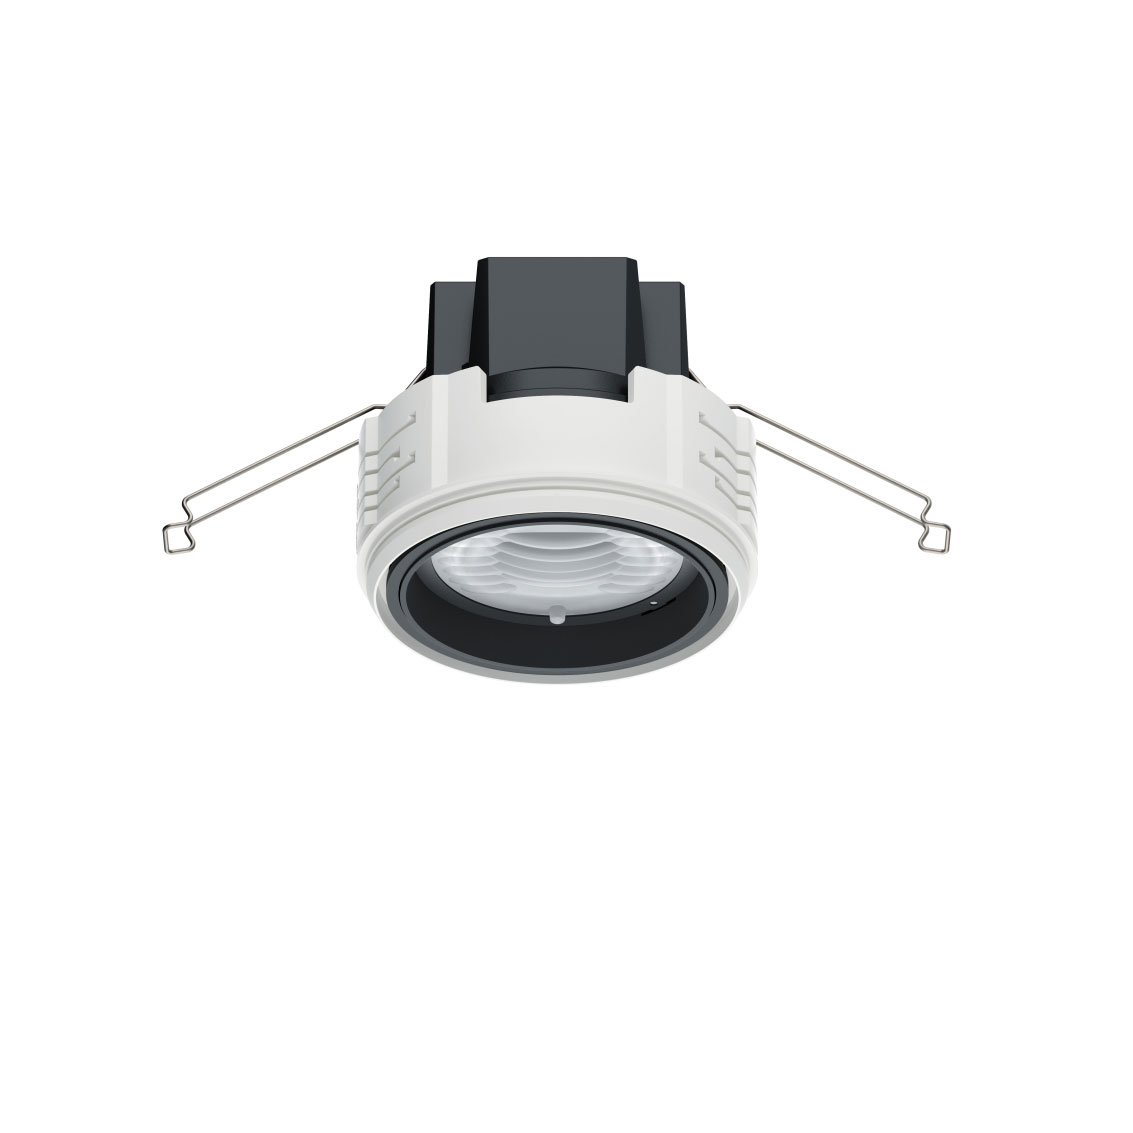 Starpoint Recessed Luminaire Wide Flood 8W 4000K 830lm Covered DALI